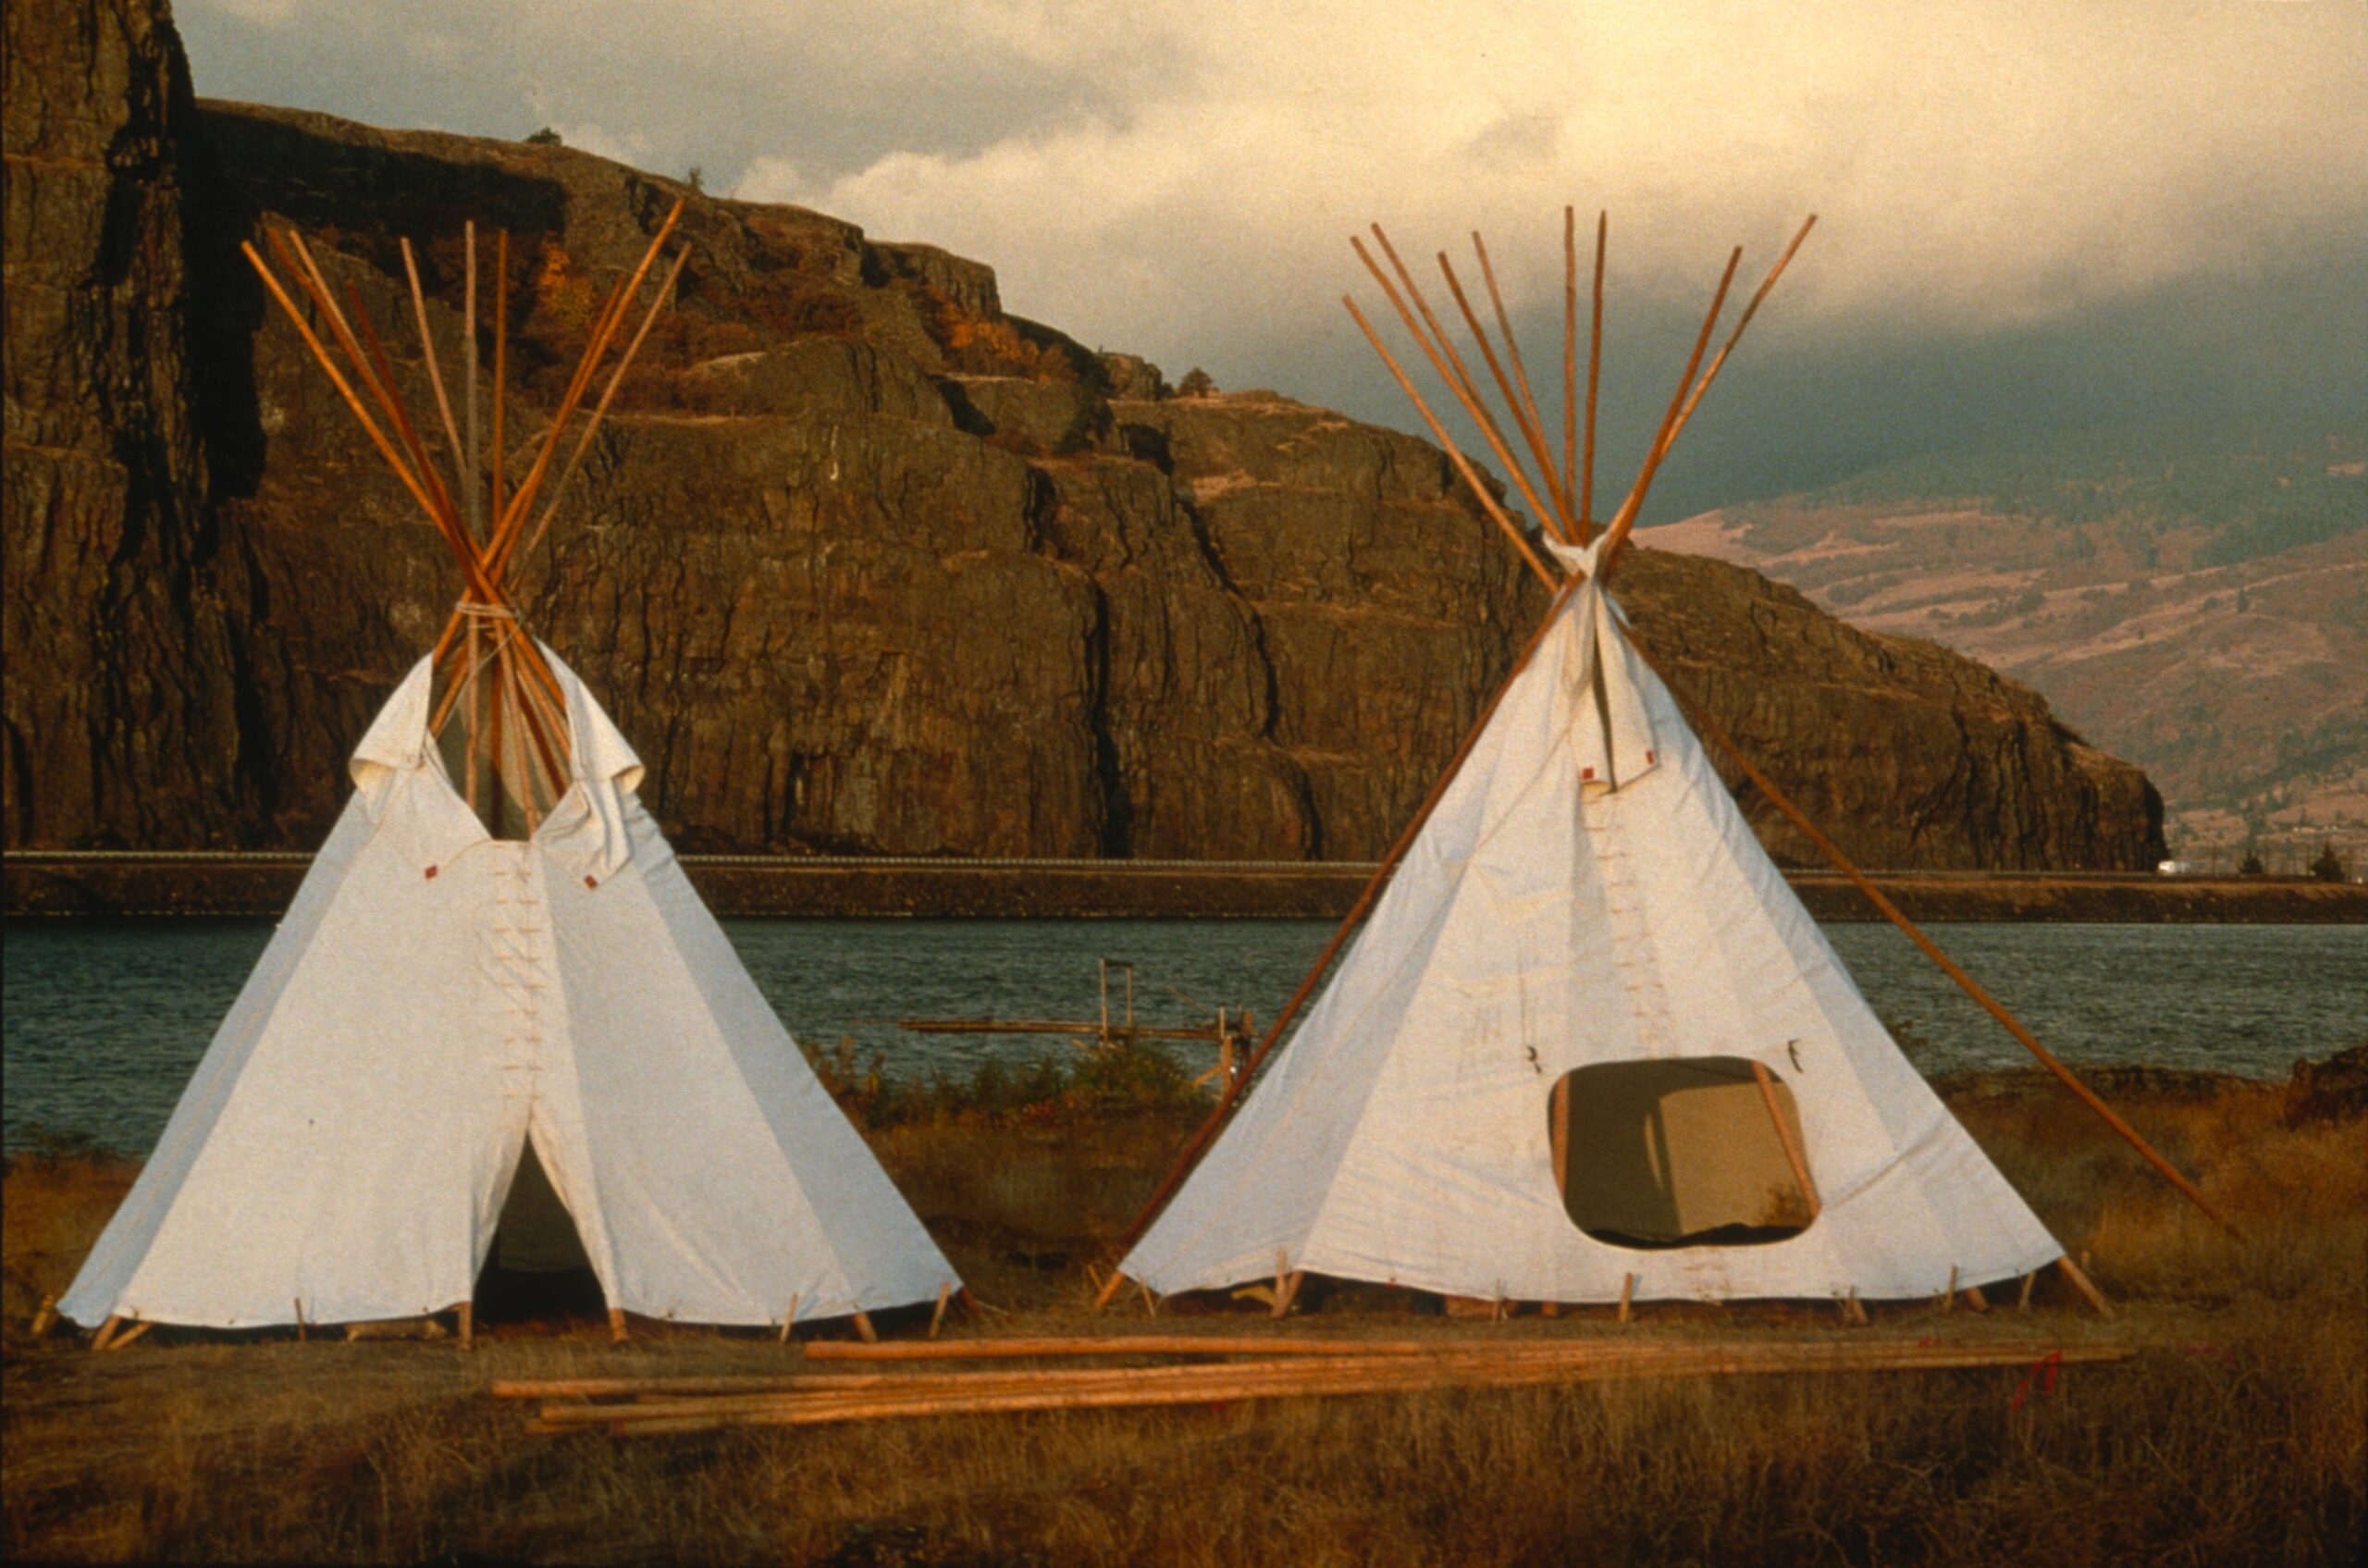 Two white teepees.